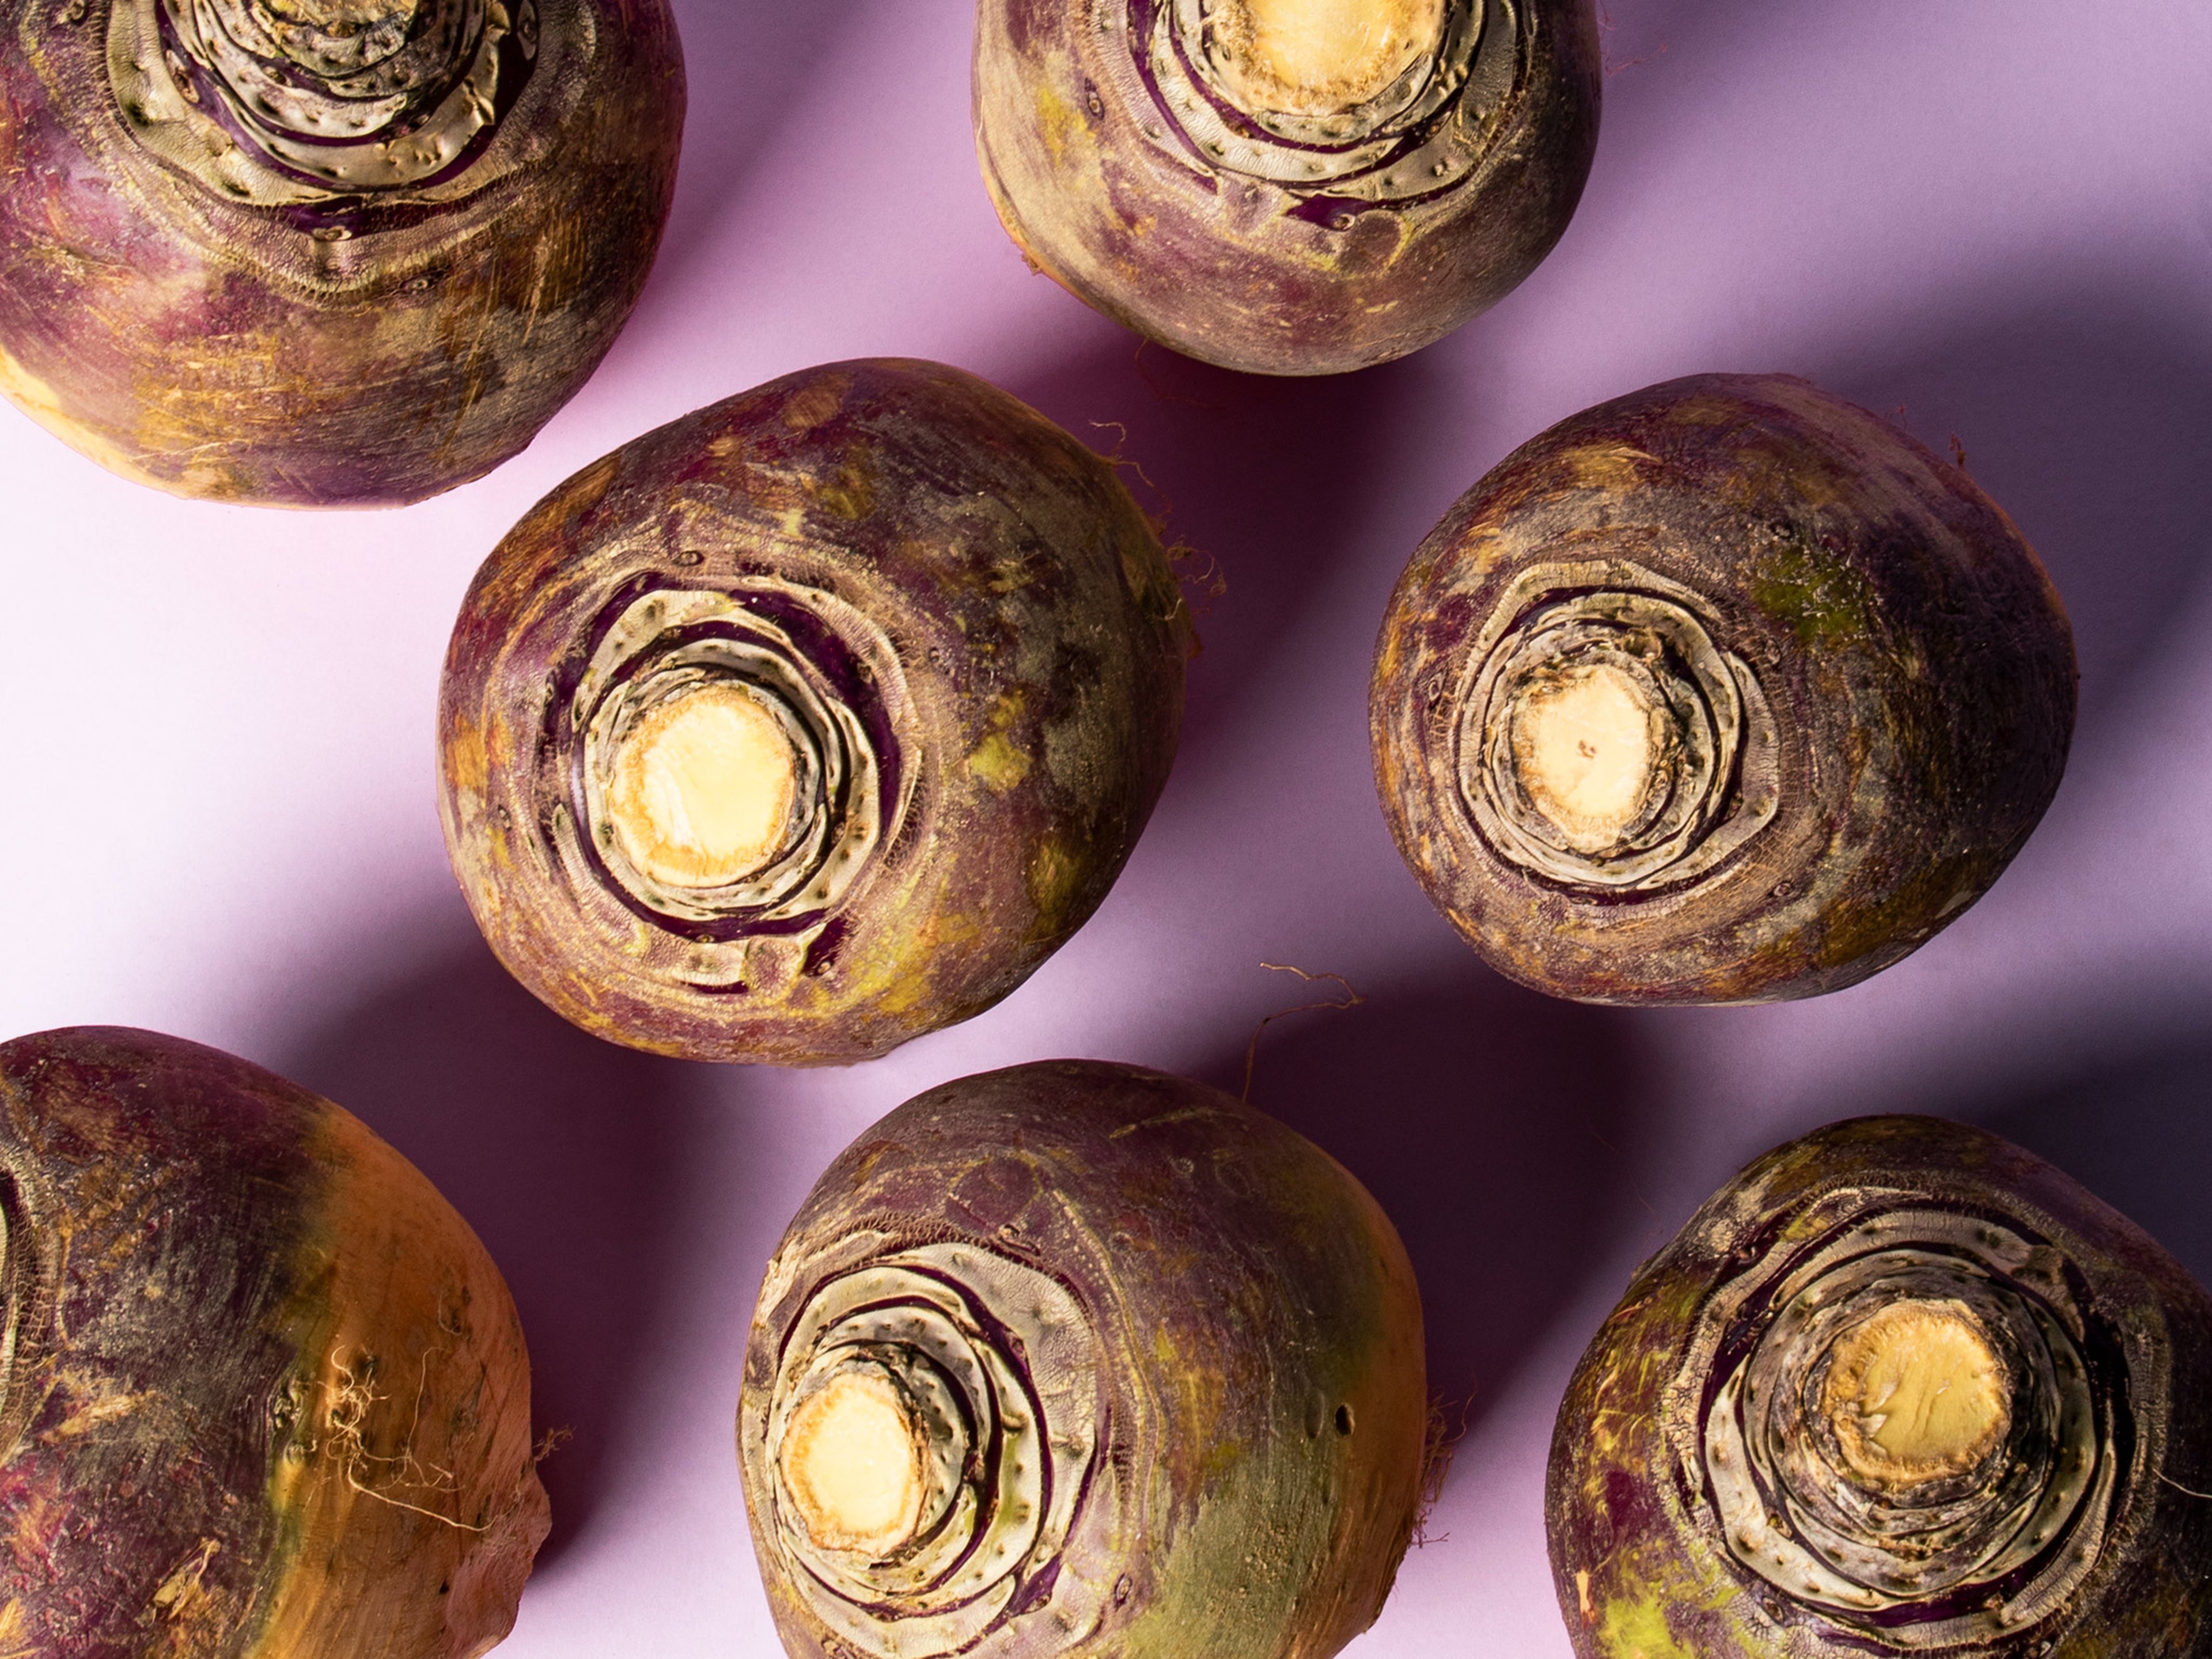 Now in Season: Everything to Know About Shopping, Storing, and Preparing In Season Rutabaga